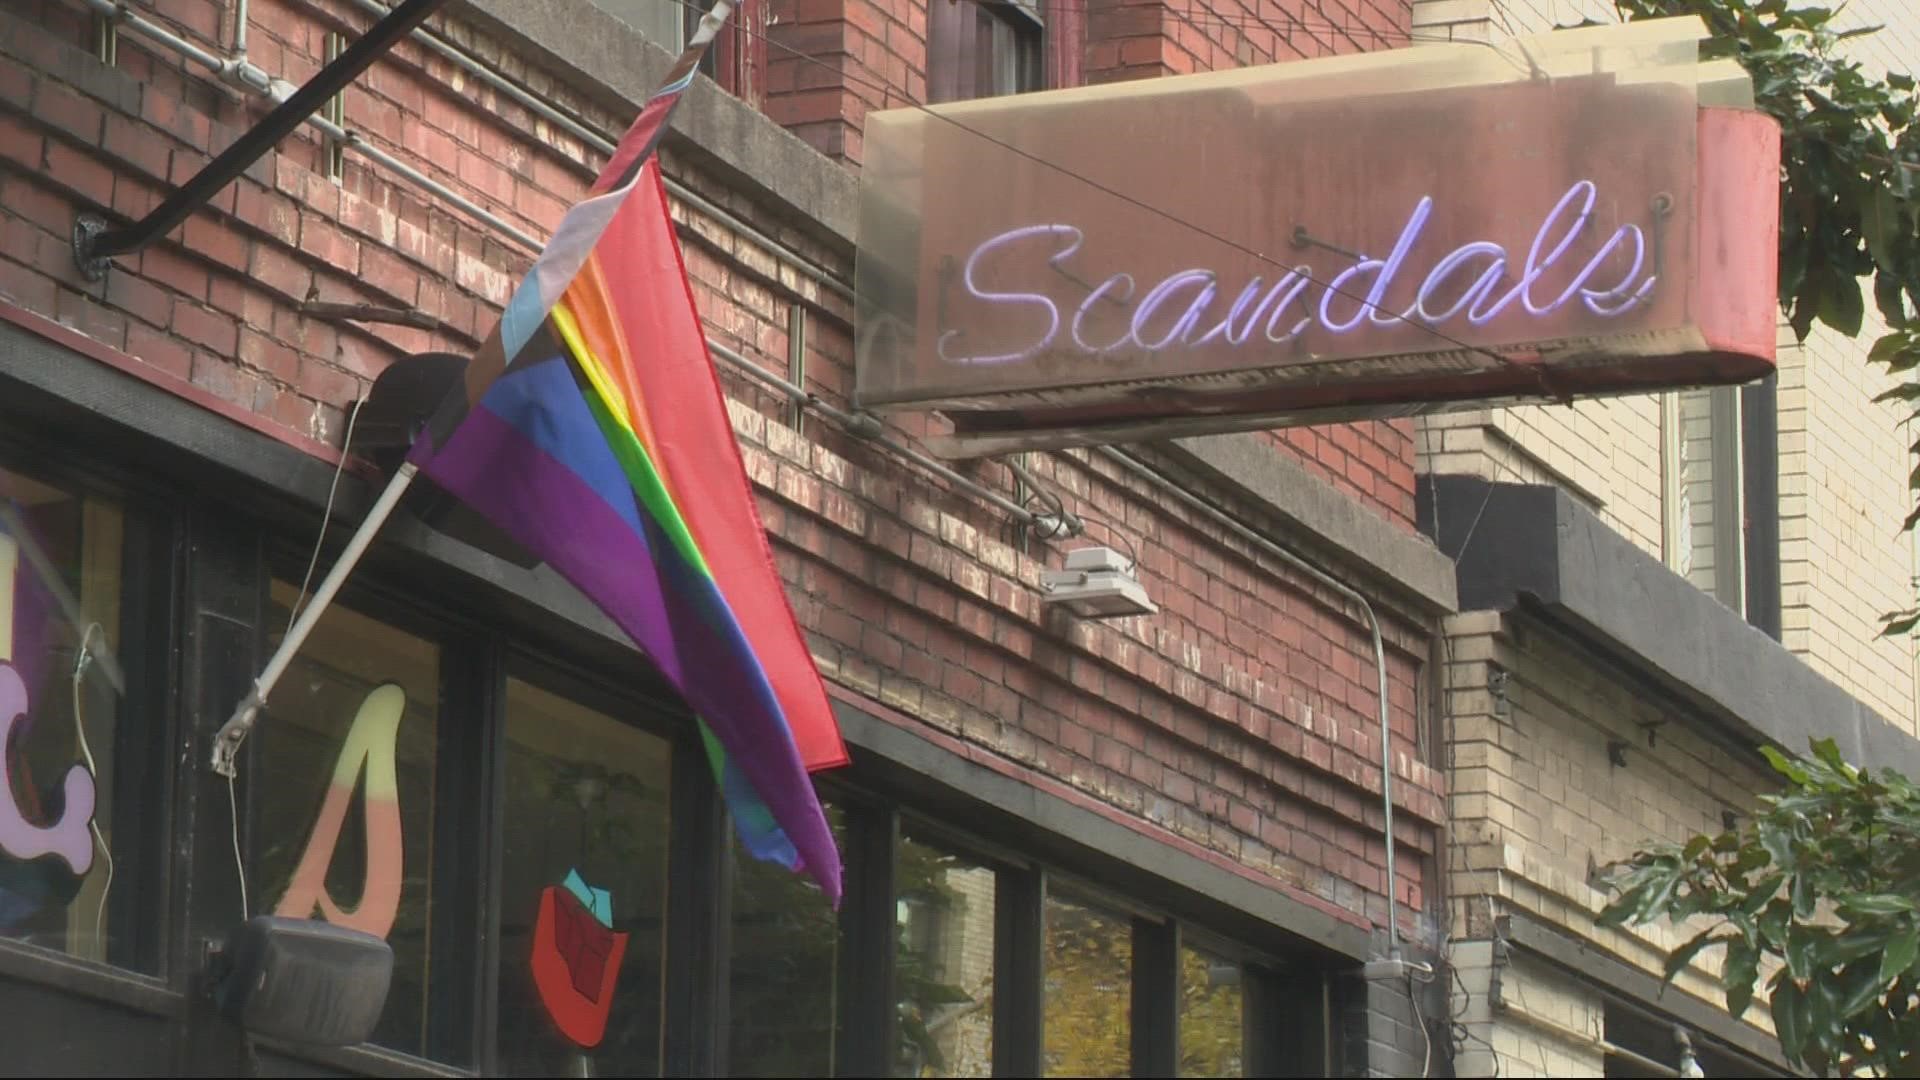 Advocates for the LGBTQ+ community in Portland expressed heartbreak and outrage for the victims and their loved ones.